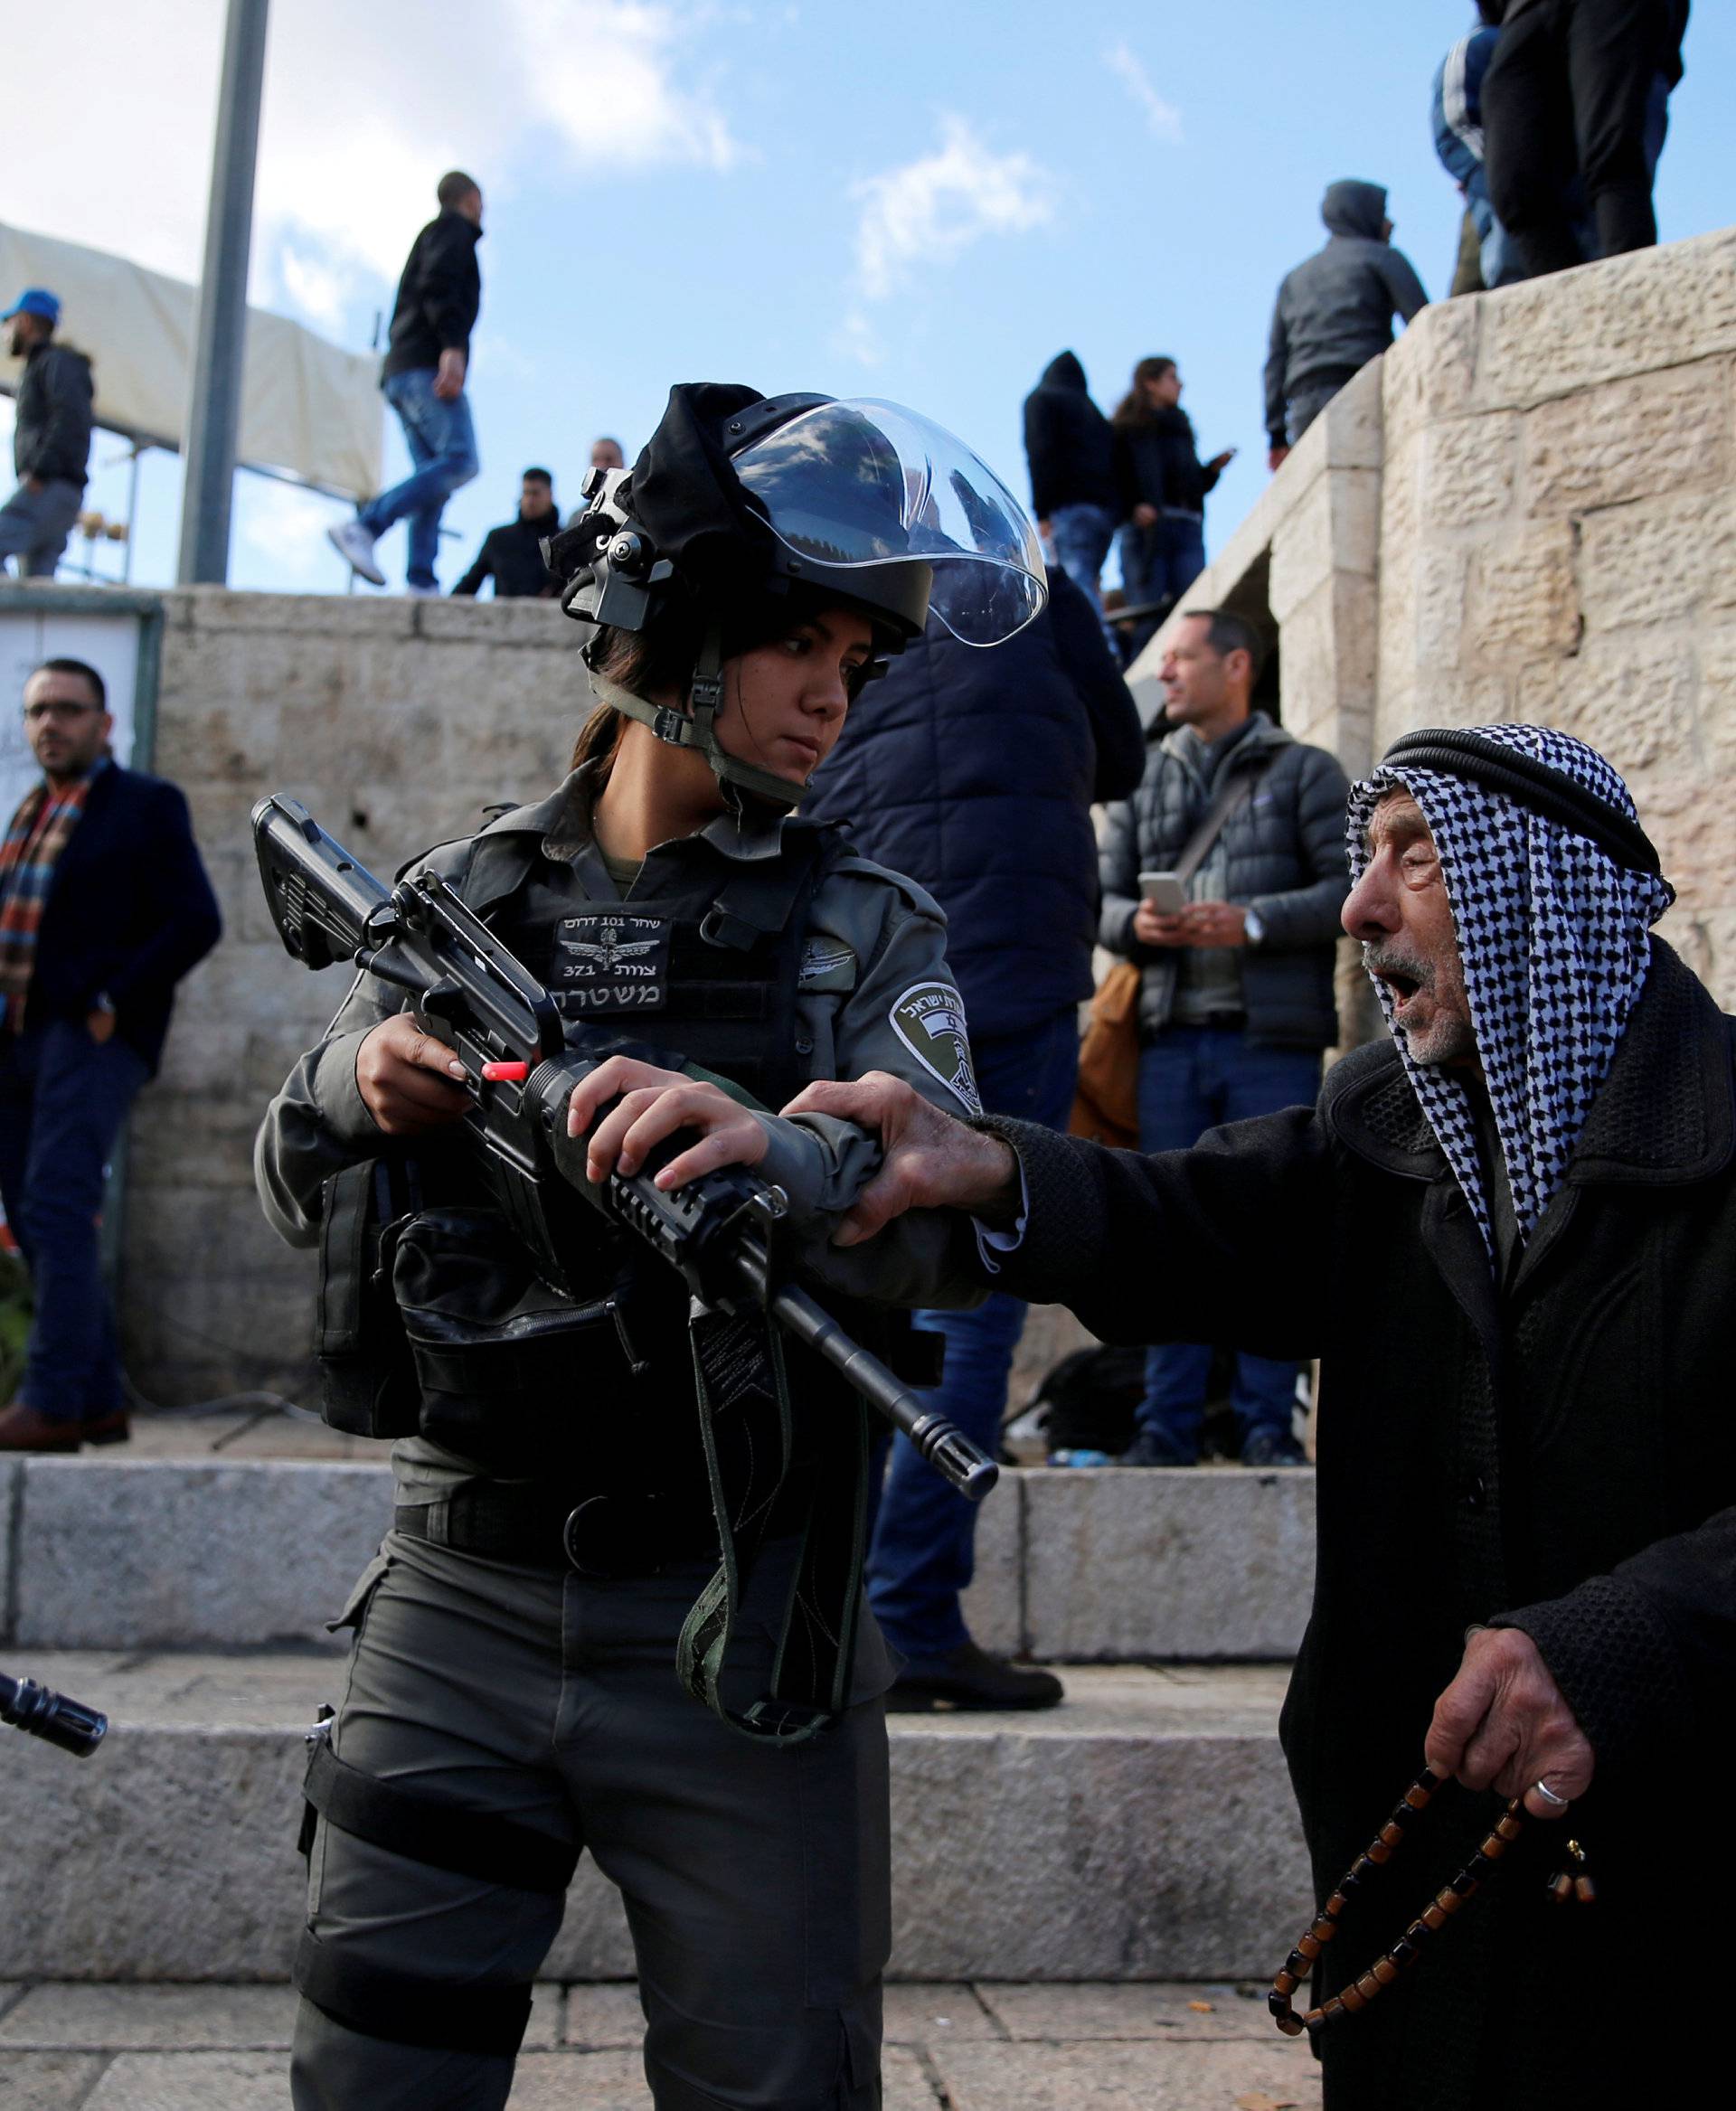 A Palestinian man argues with an Israeli border policewoman during a protest following U.S. President Donald Trump's announcement that he has recognized Jerusalem as Israel's capital, near Damascus Gate in Jerusalem's Old City